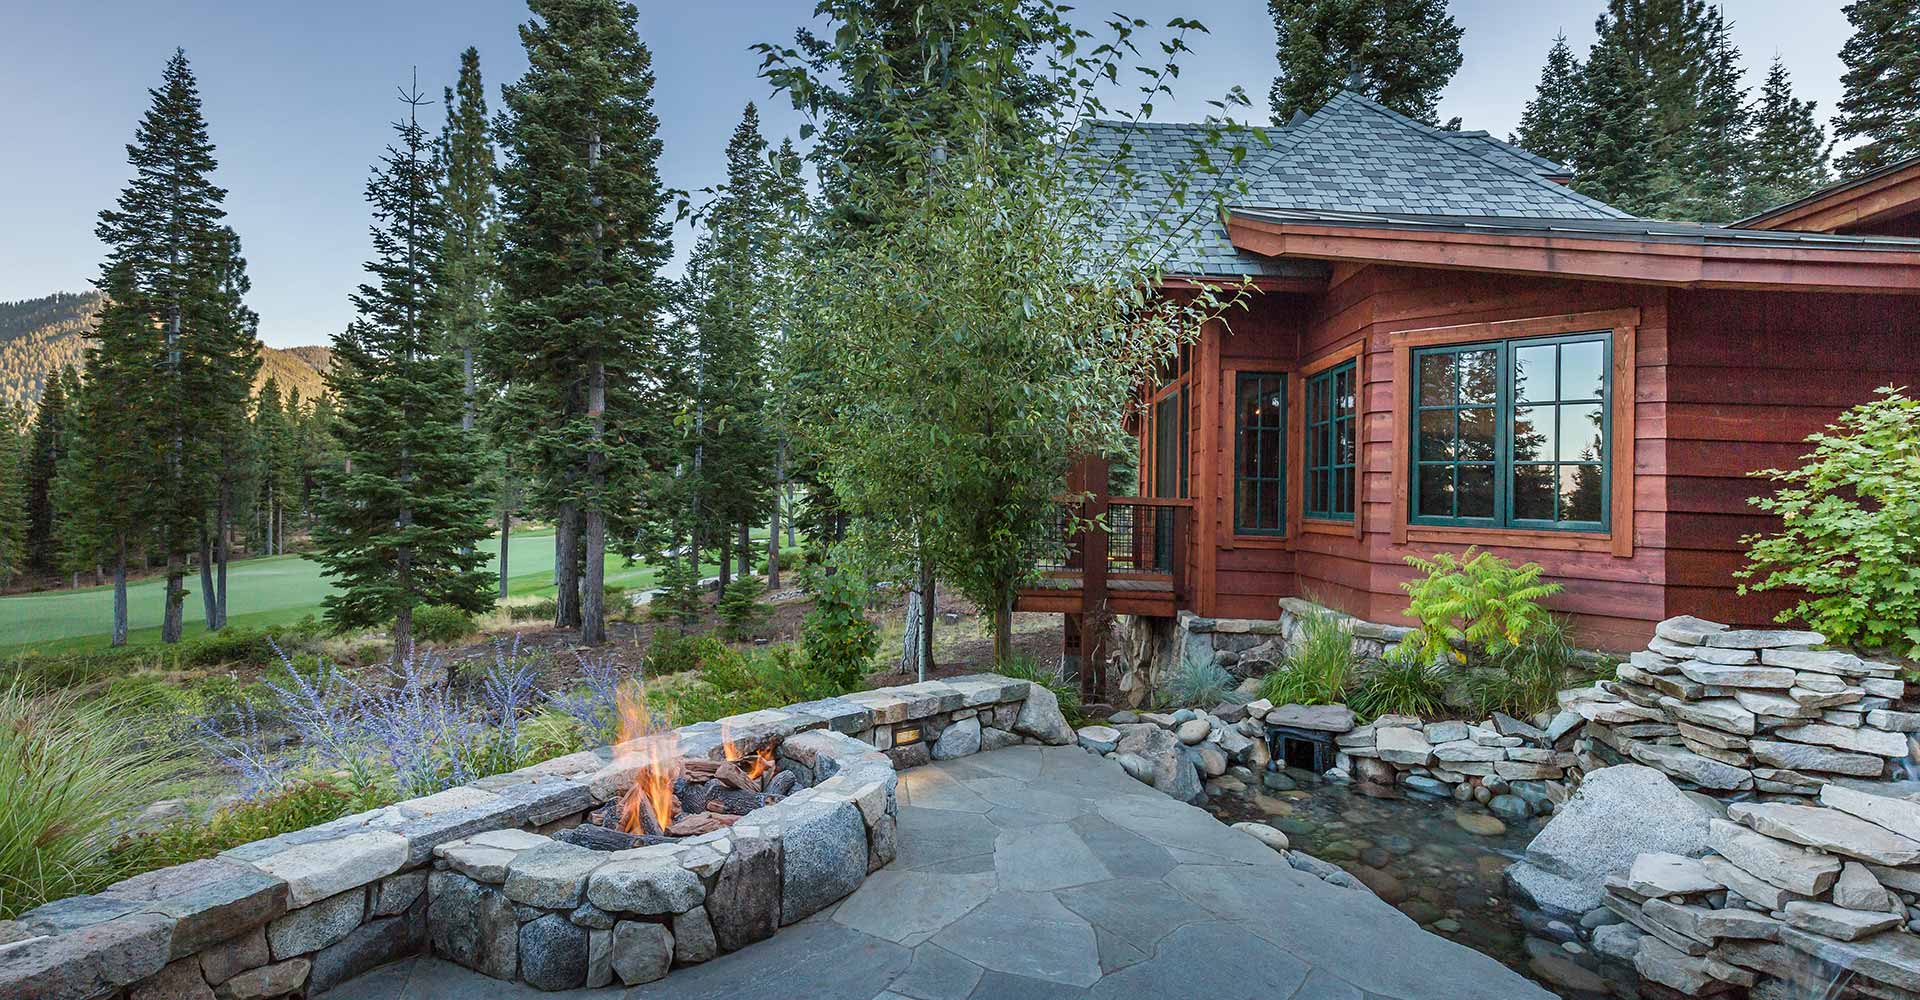 8336 Valhalla Drive - Truckee luxury homes for sale